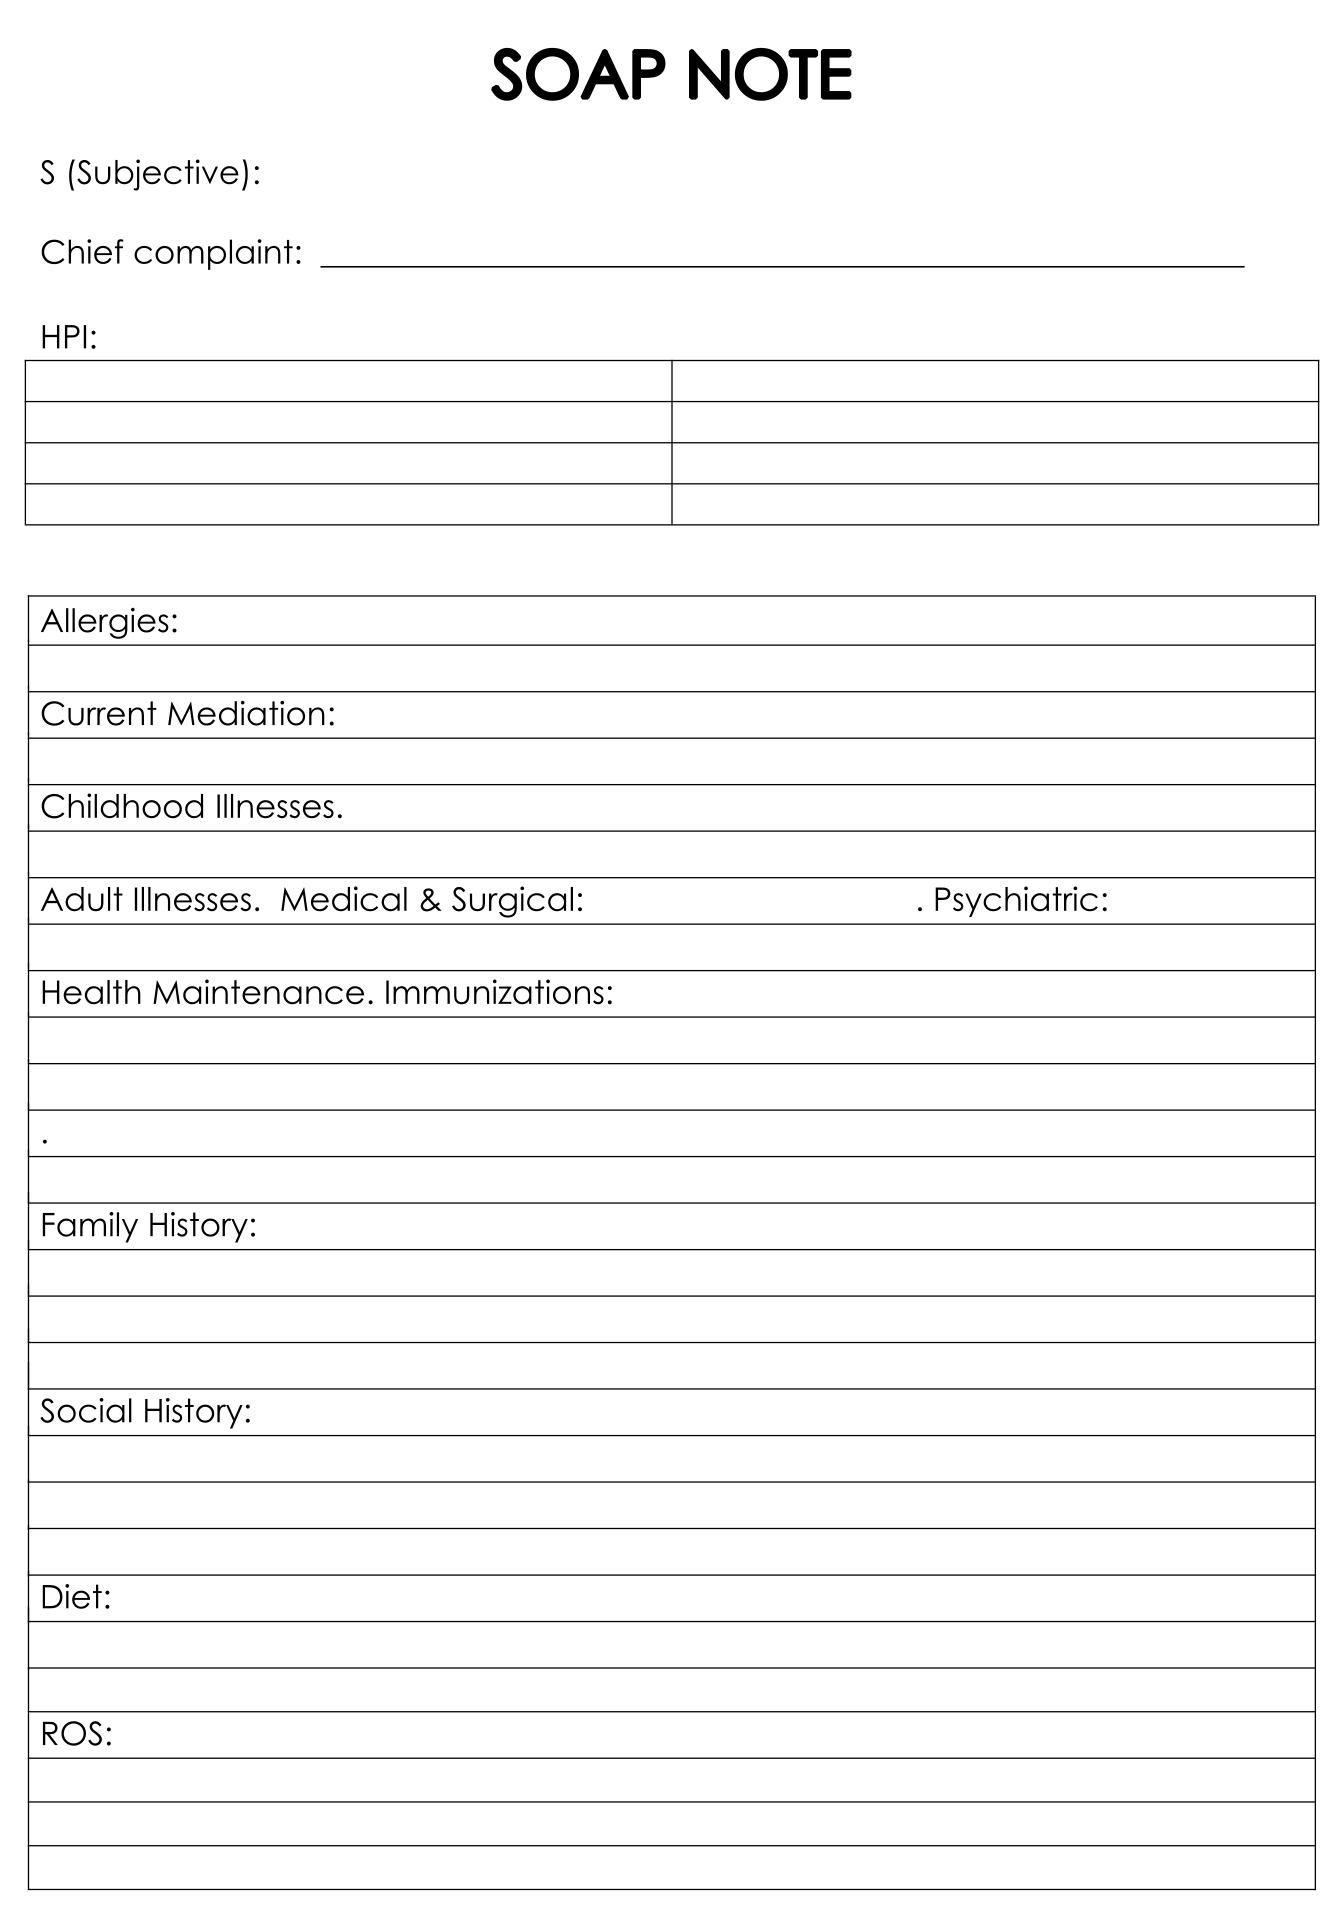 20 Best Printable Counseling Soap Note Templates - printablee.com Regarding Counselling Session Notes Template